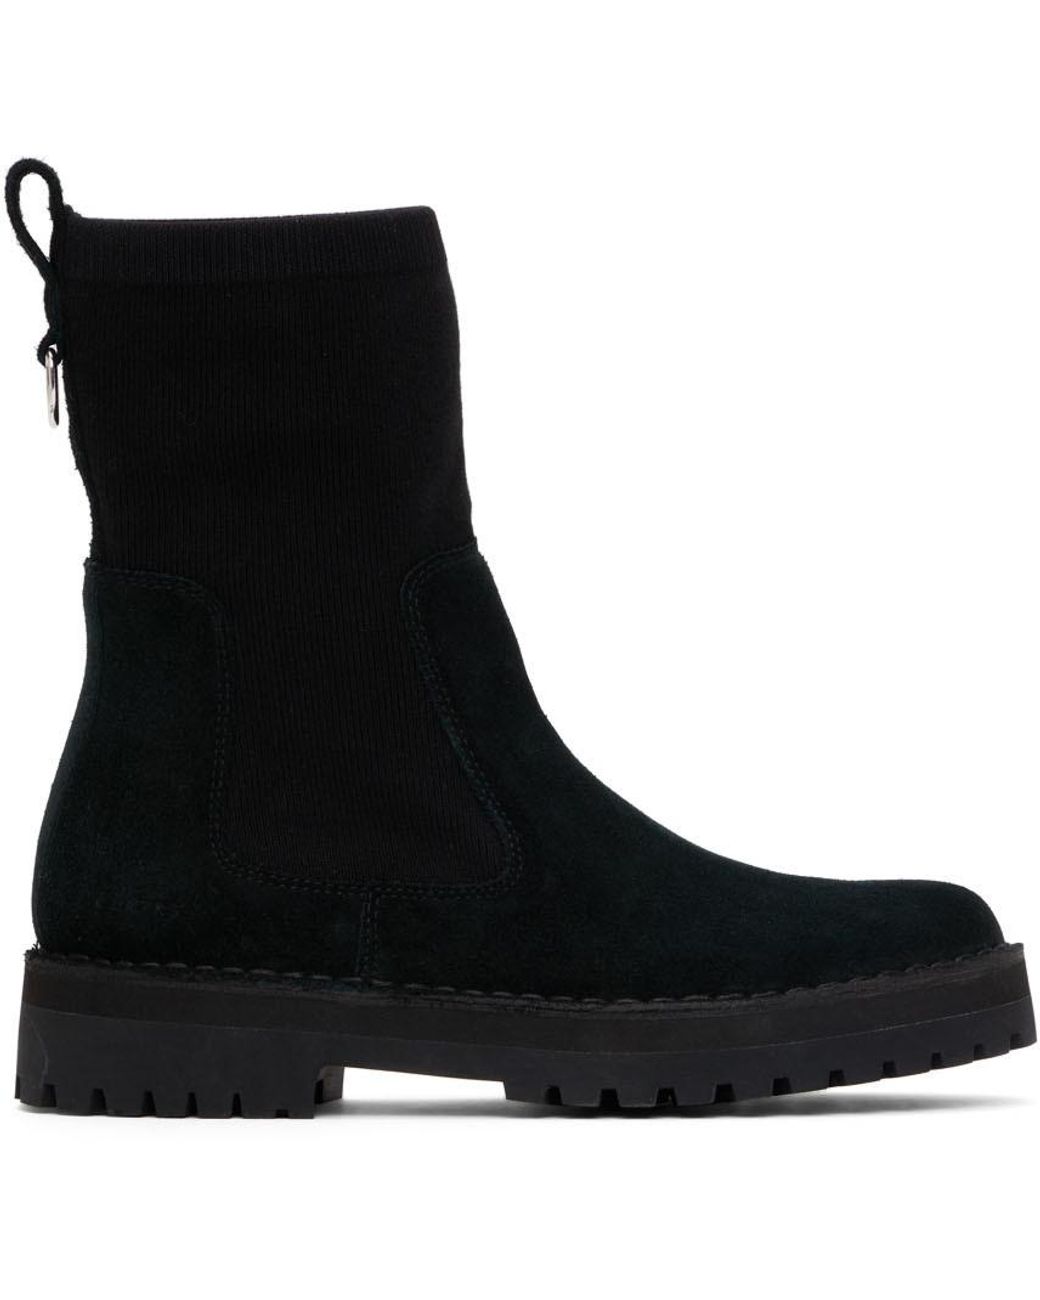 Clarks Suede Rock Knit Boots in Black | Lyst